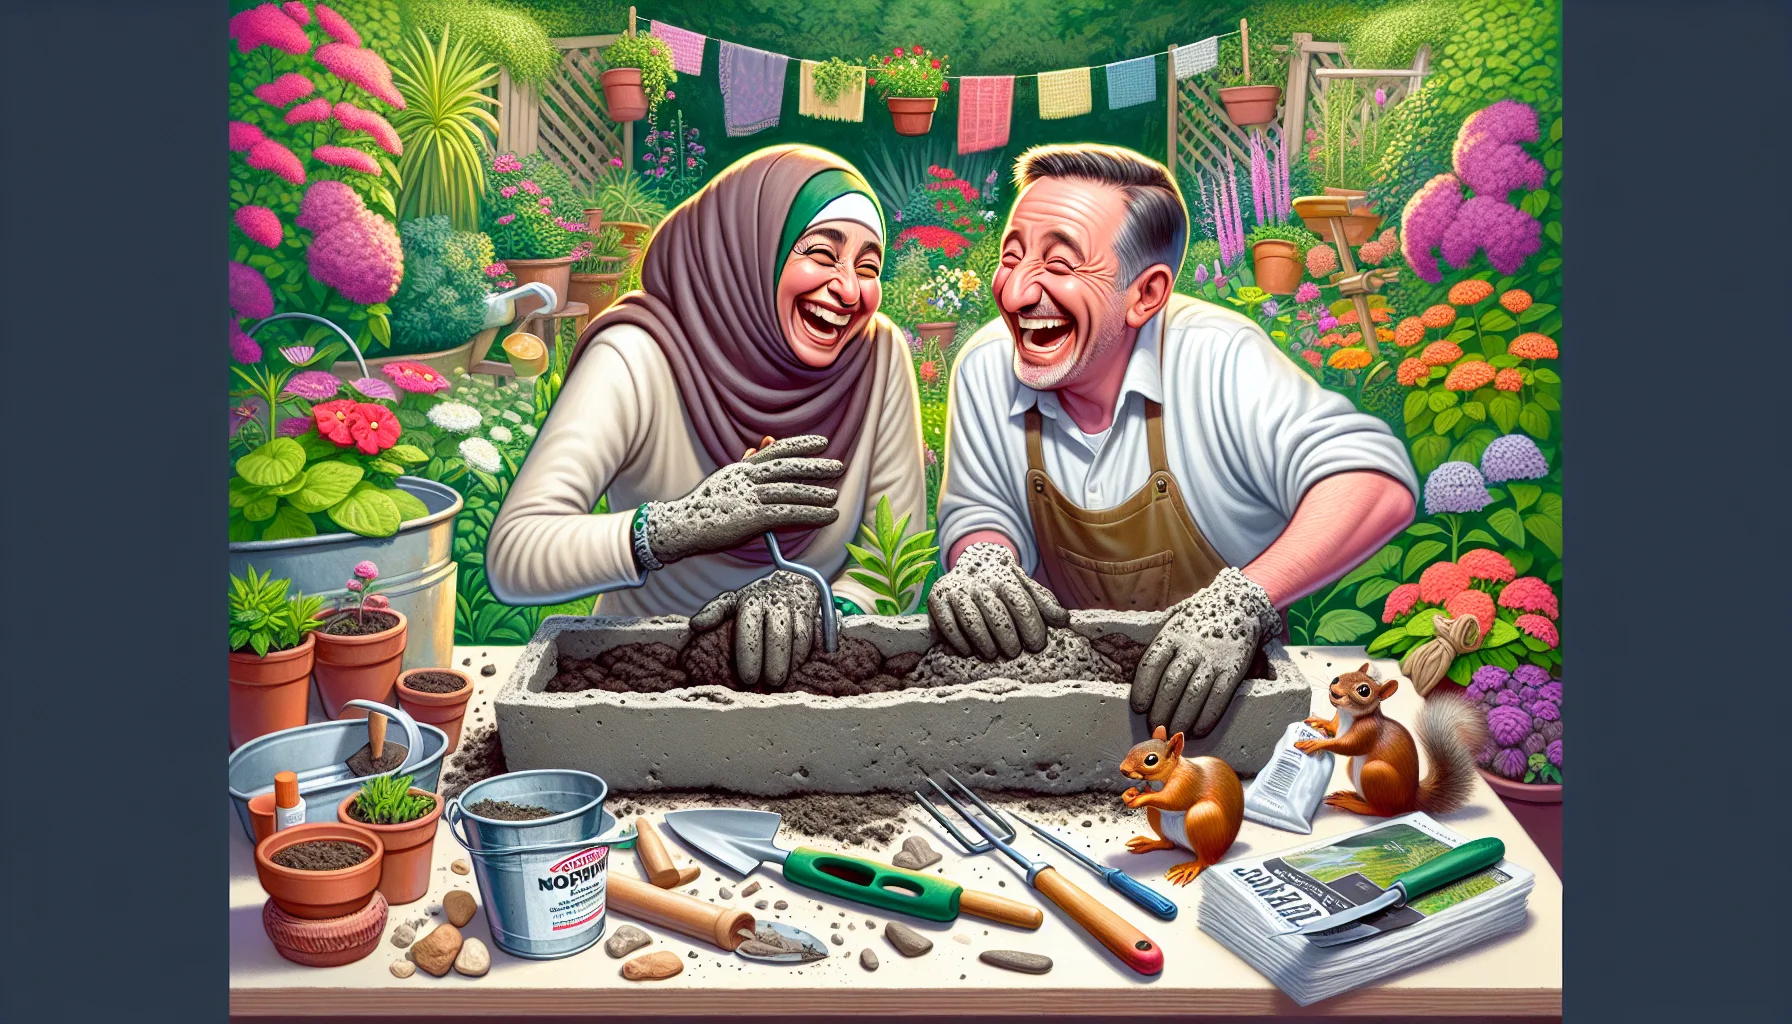 Depict a humorous scene of a Middle-Eastern woman and a Caucasian man, both laughing and enjoying the process of crafting a Hypertufa Trough. They are in a lush garden surrounded by a variety of colorful plants and flowers. Their gardening tools, like trowels, gloves, watering cans, are scattered about in a charmingly disorganized fashion. The Hypertufa Trough they are creating is mid-process, with materials like peat moss and Portland cement visible. Perhaps, a curious squirrel is trying to 'help,' adding to the comedy of the scenario. The aim is to capture the joy and fun of garden crafting and to inspire people to join in this hobby.